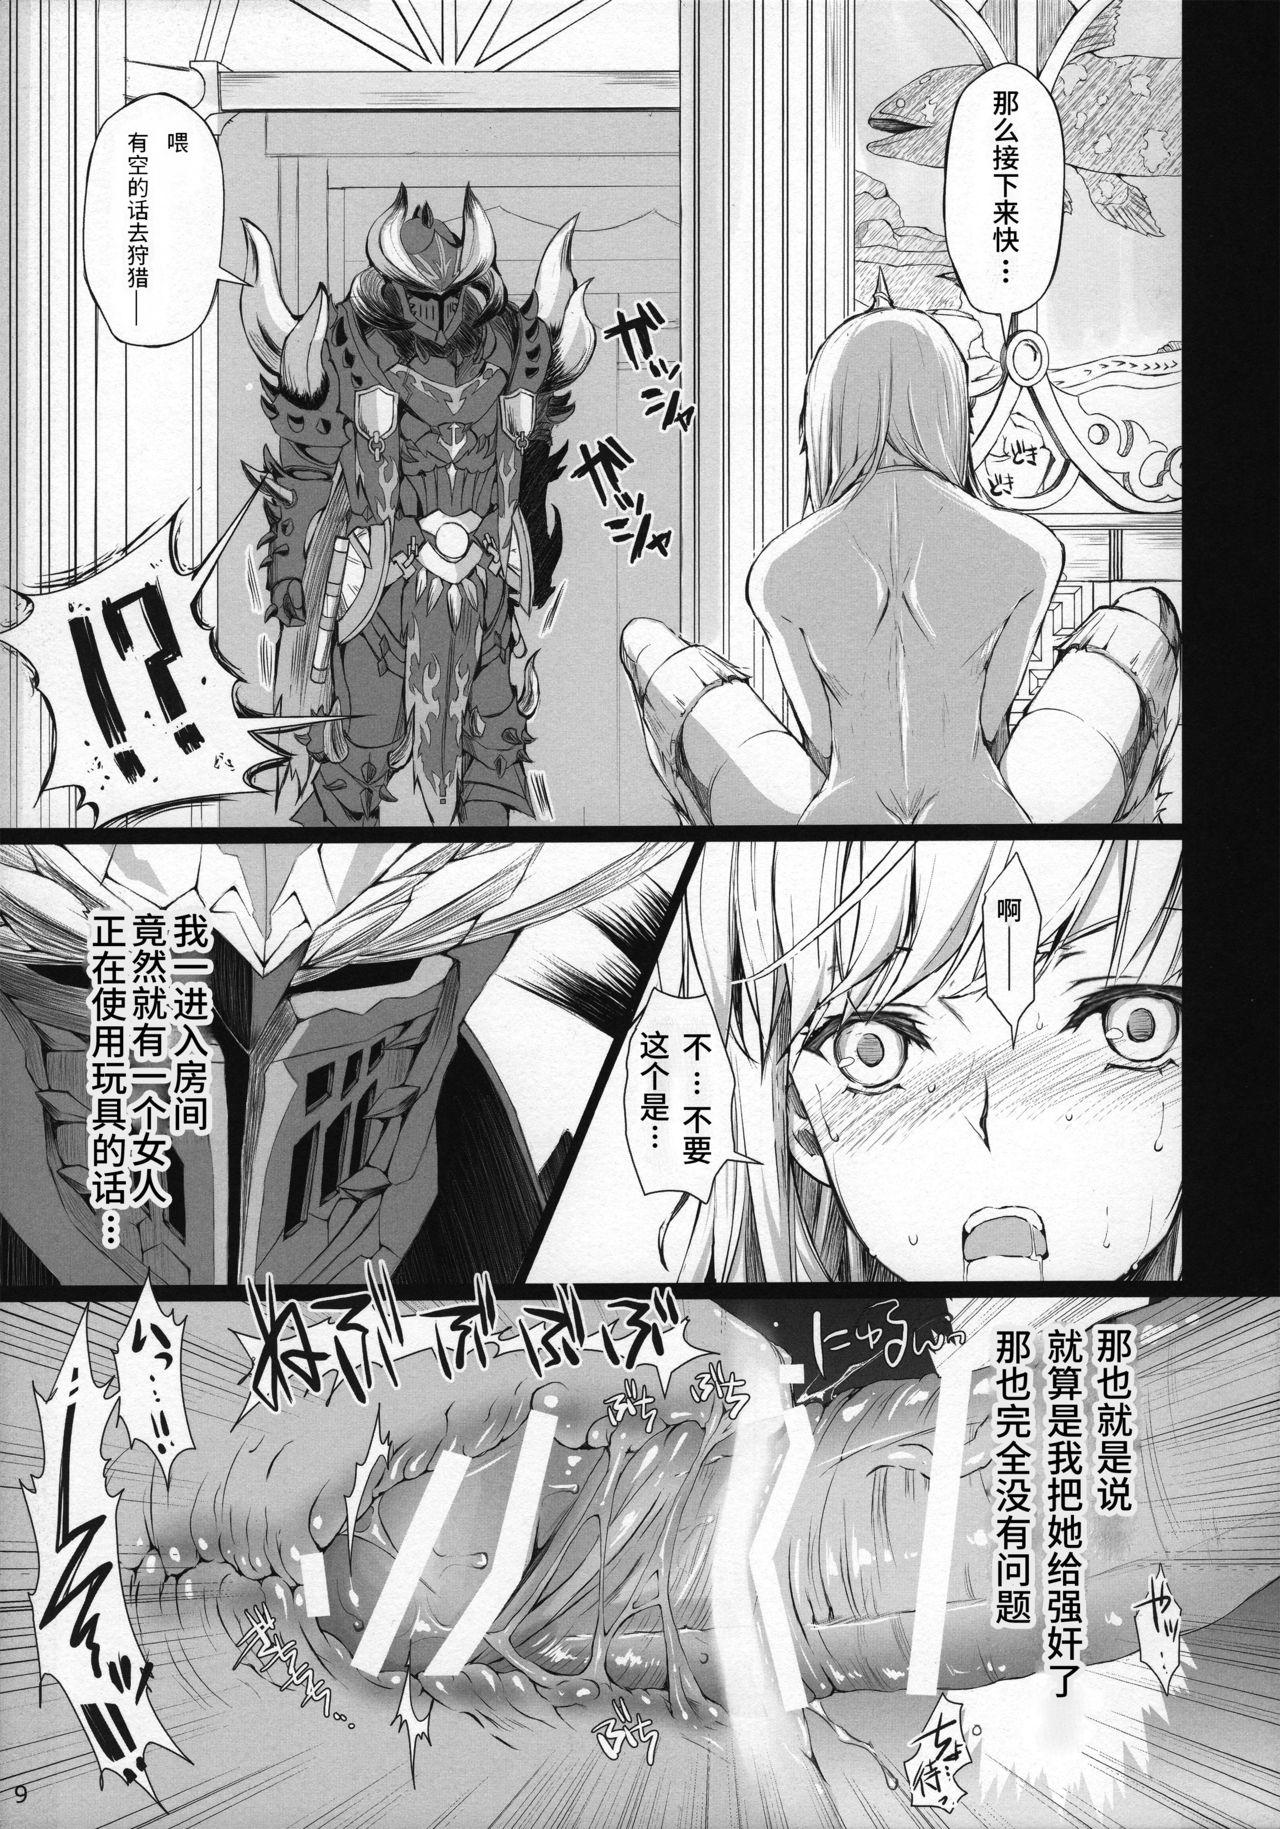 Thief Udonko 18 - Monster hunter Celebrity Nudes - Page 8